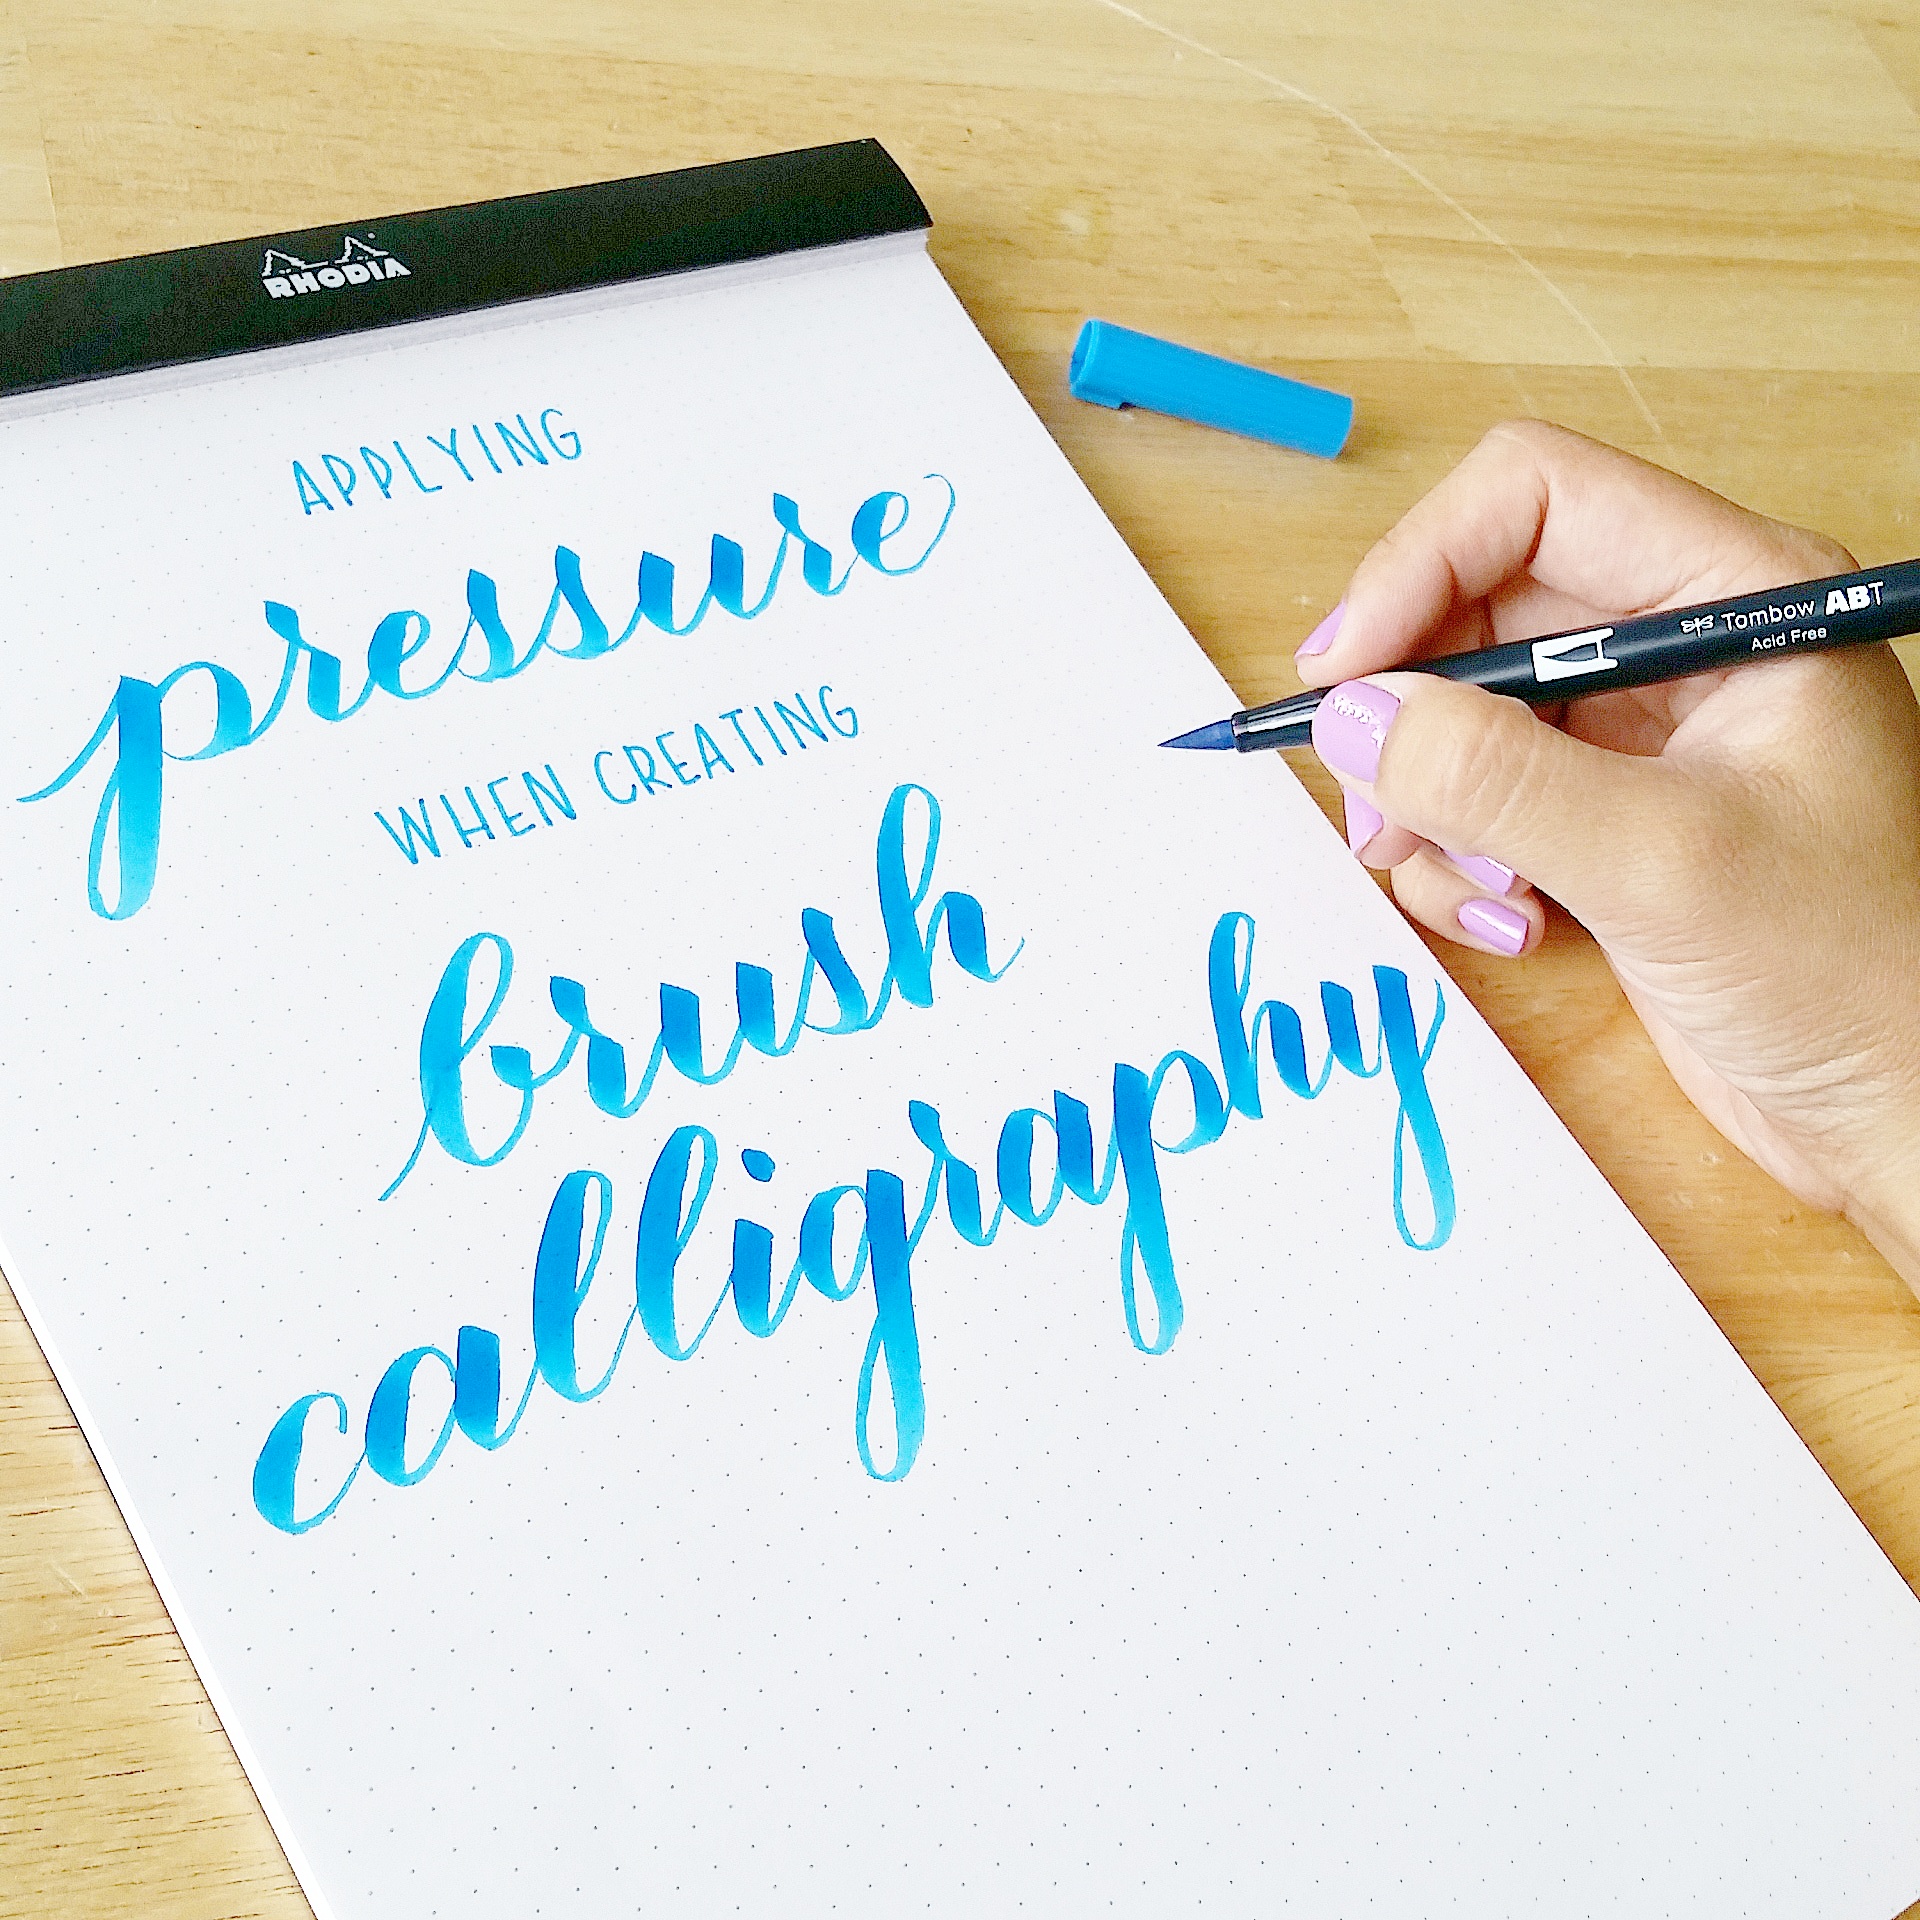 Applying Pressure in Brush Calligraphy with Sharisse!